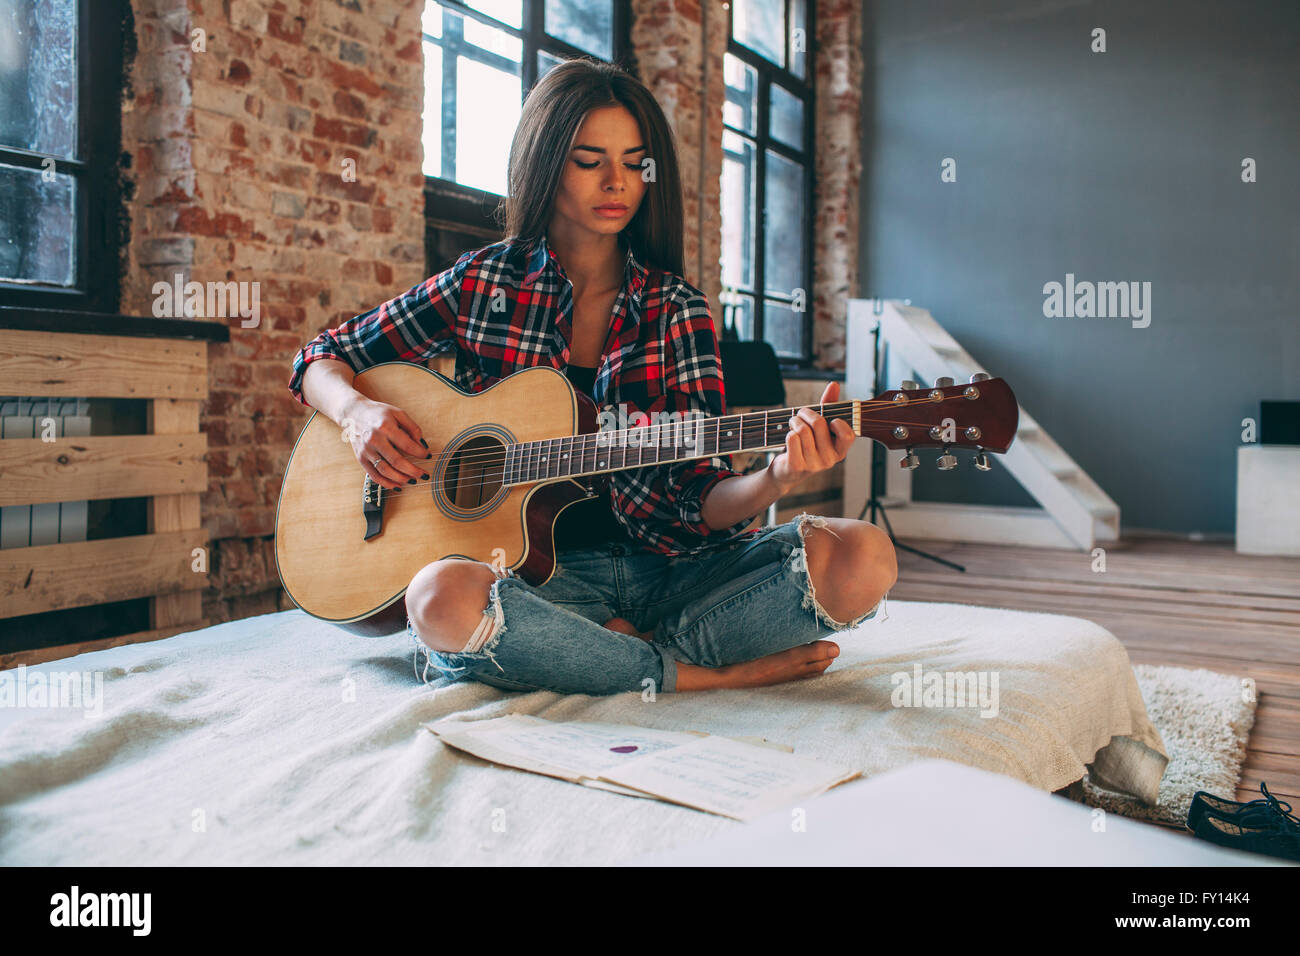 Young woman playing guitar while sitting on bed at home Banque D'Images